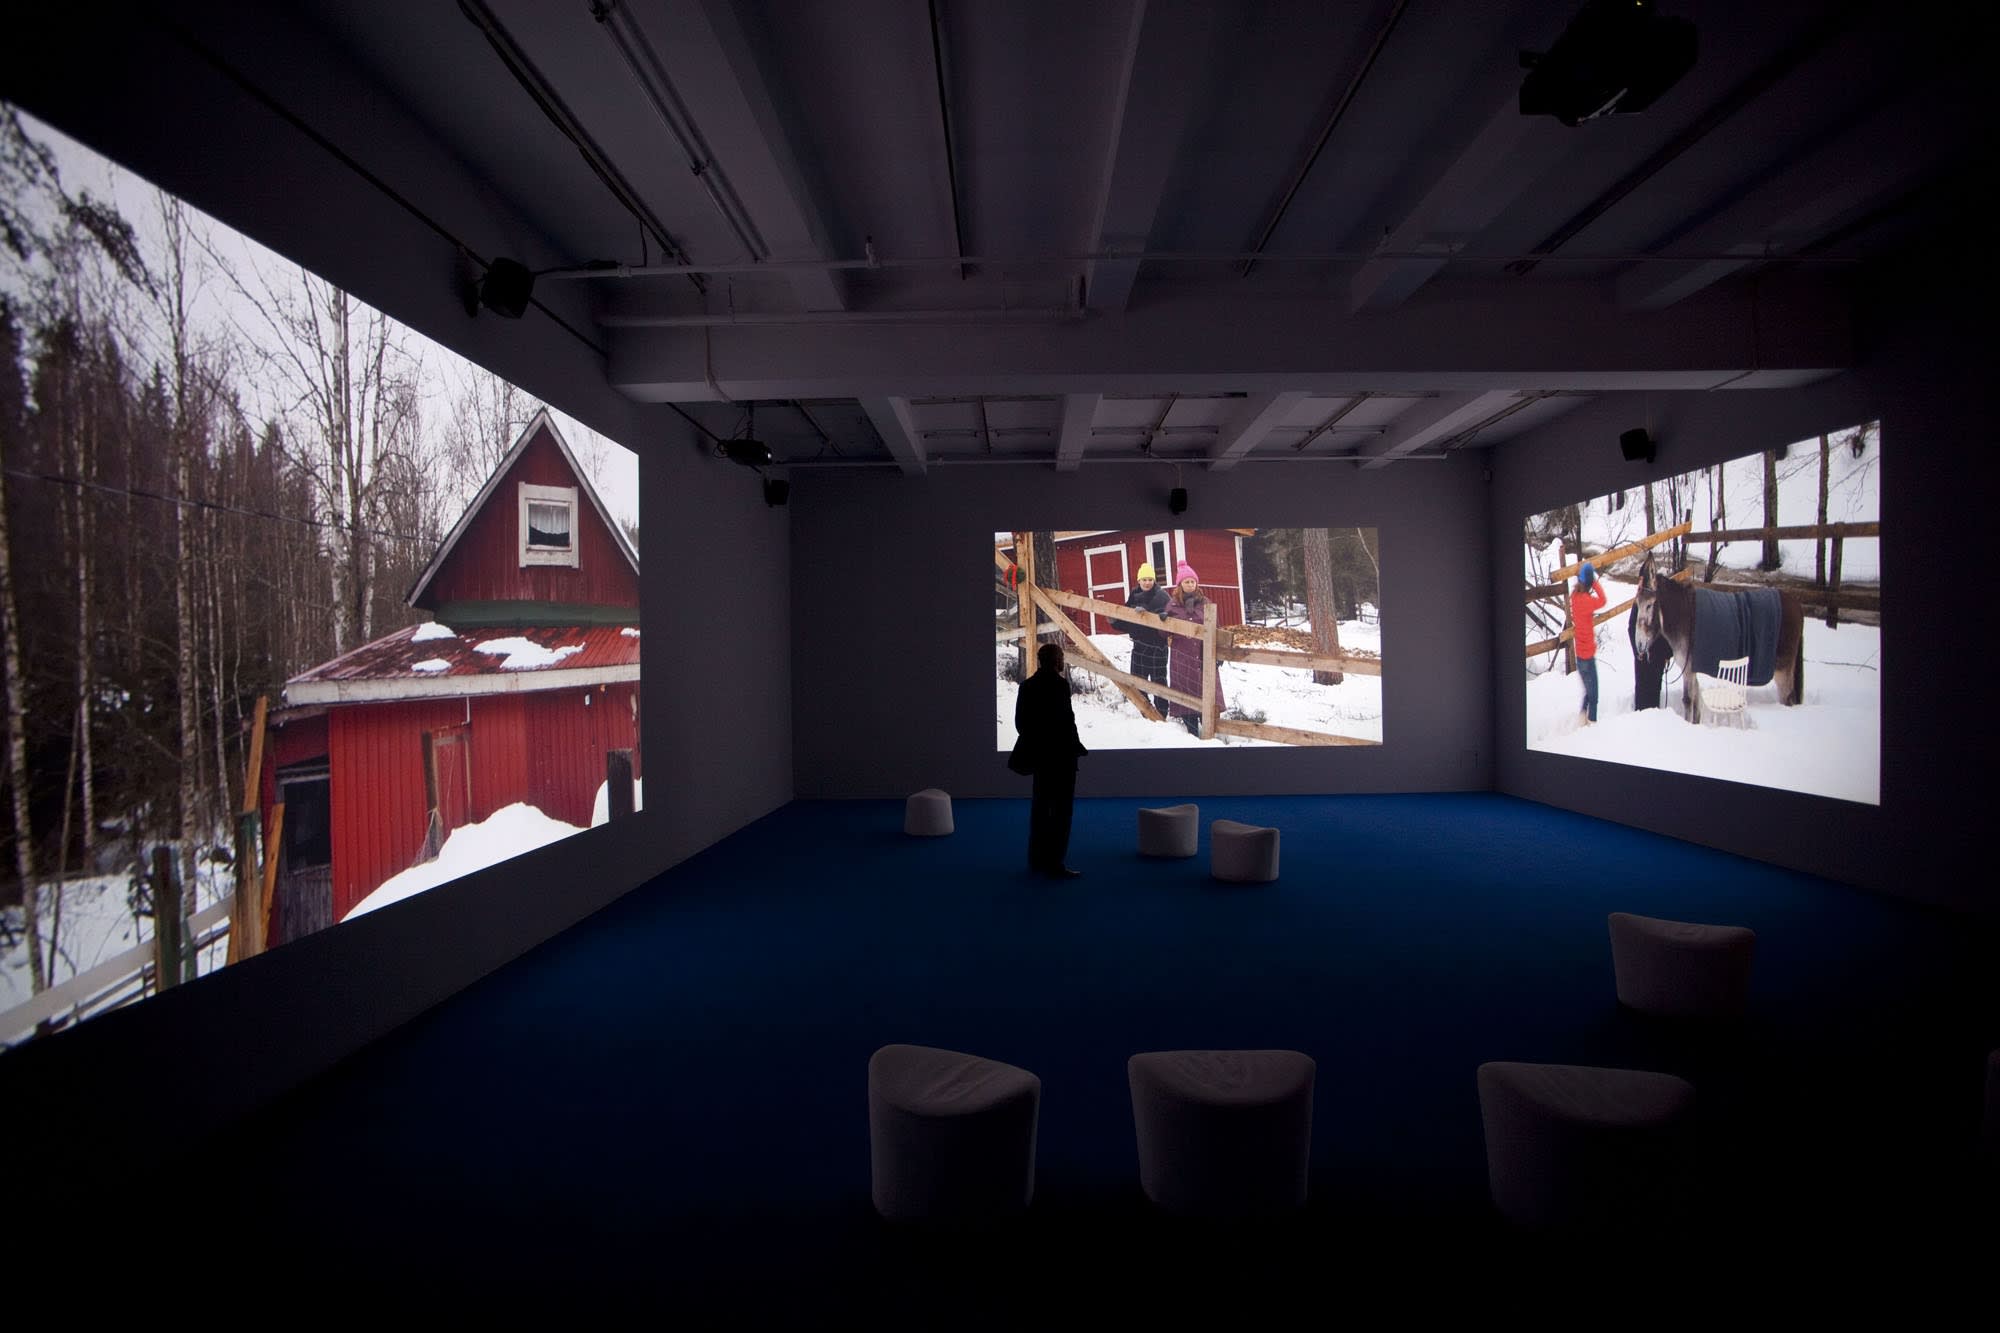 A man stands in the center of a room surrounded by large projections of snow-covered exterior images of a red barn. 